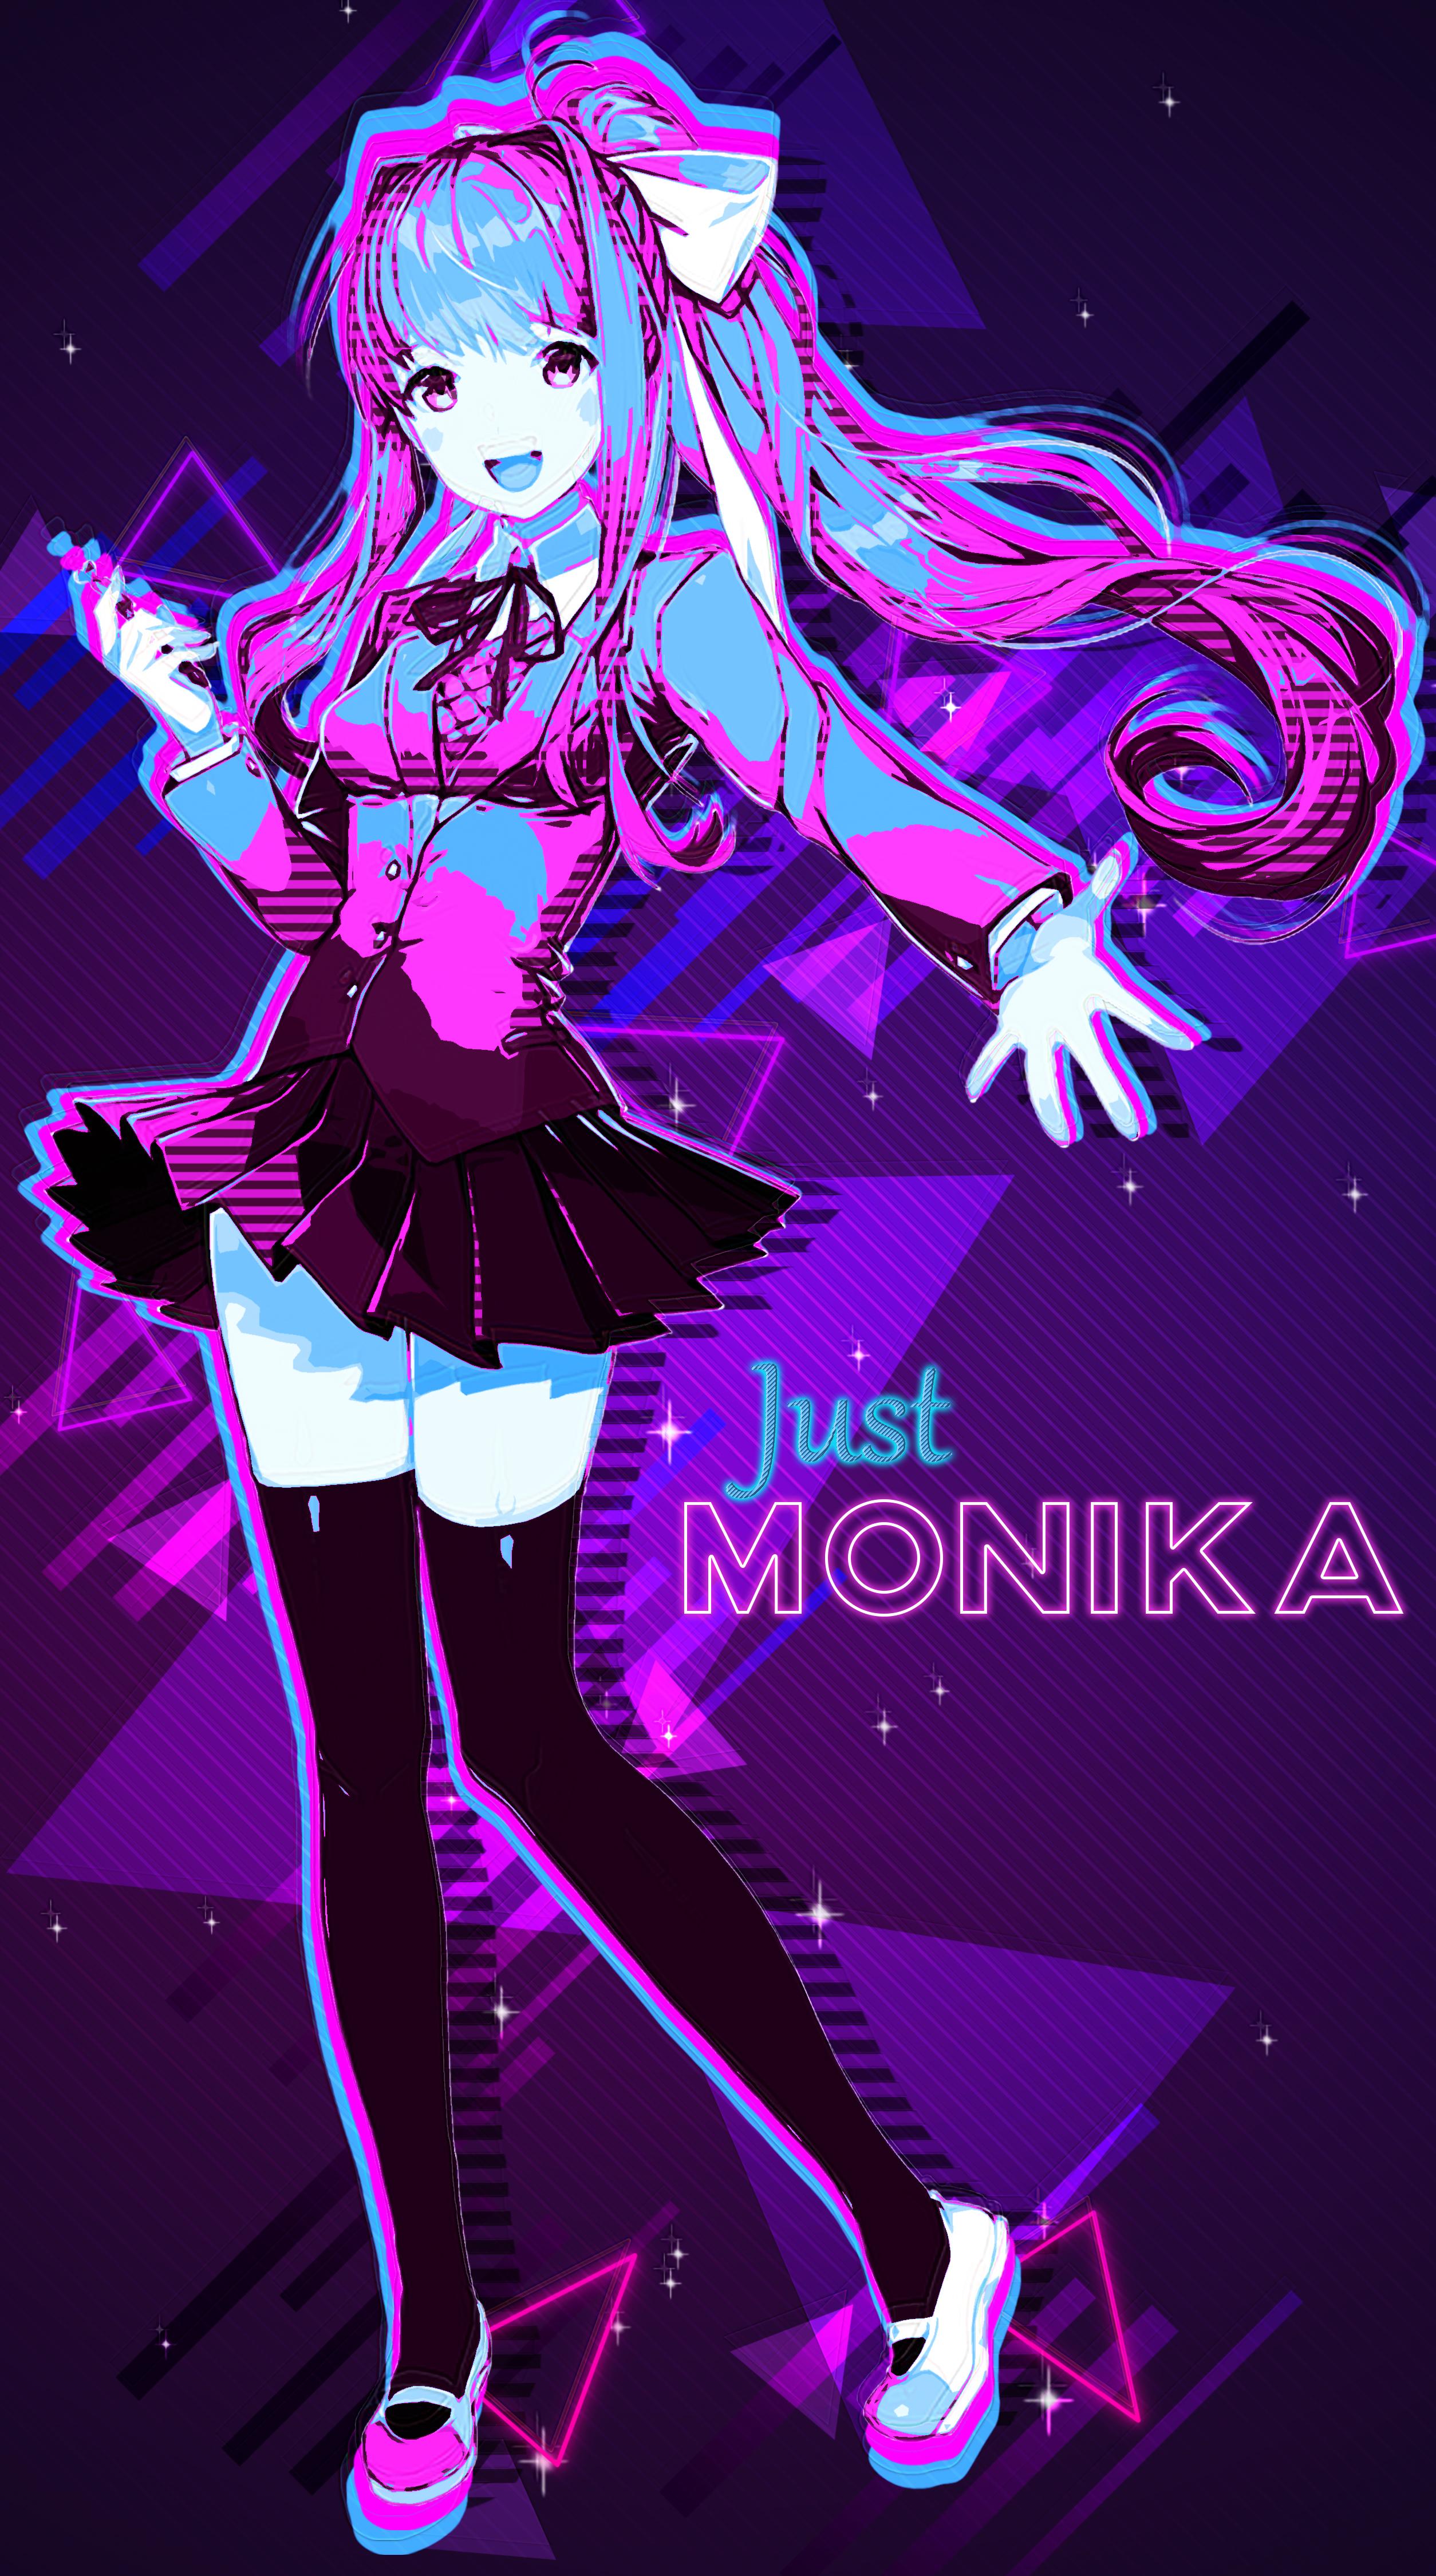 a very trippy 1980s monika wallpaper i made while messing around